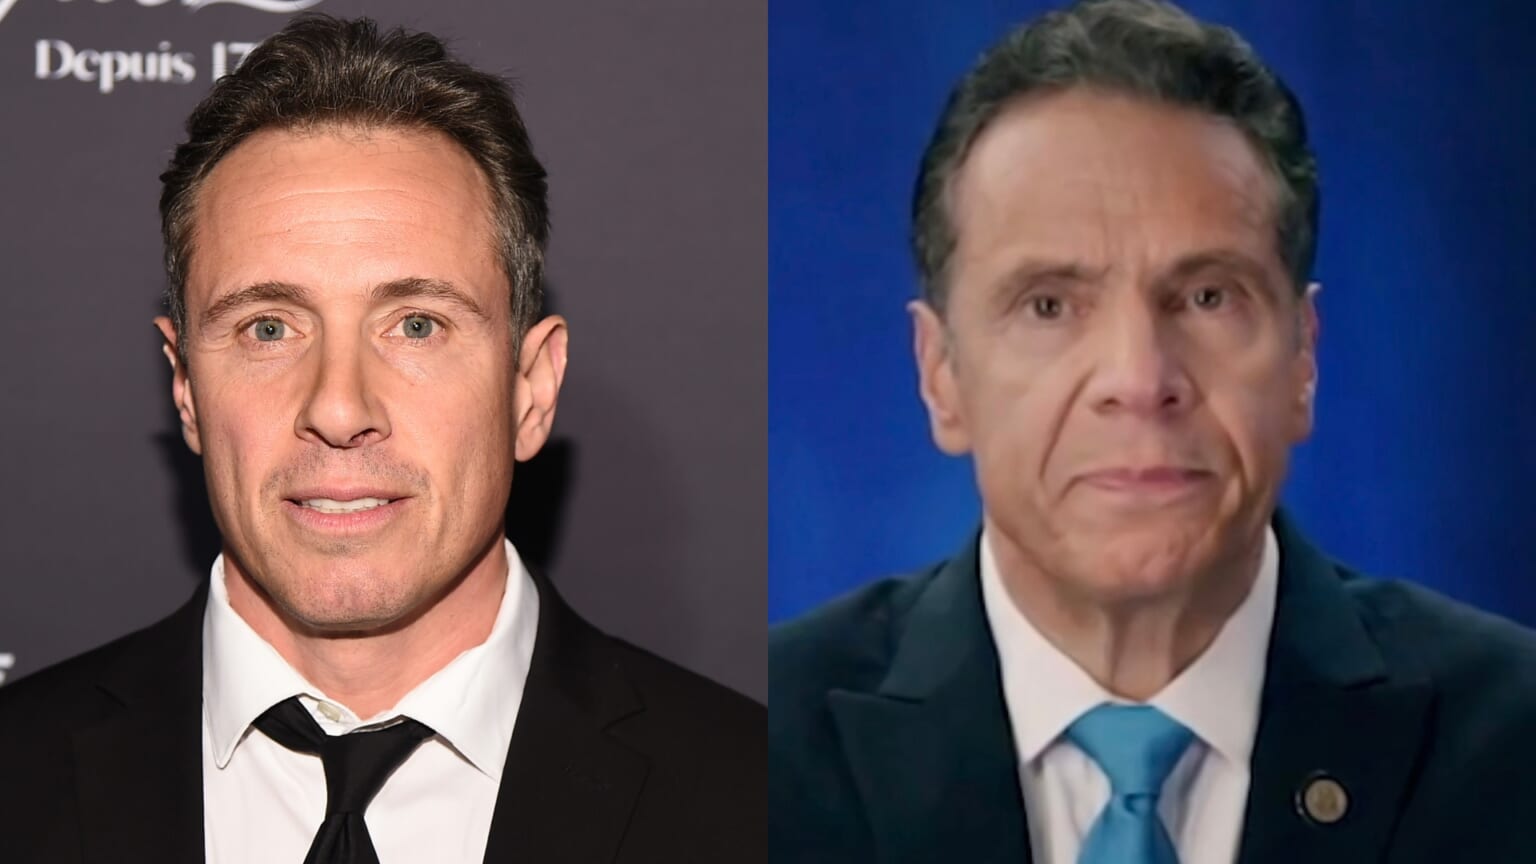 Chris Cuomo breaks his silence on allegations against his brother: 'I'm ...